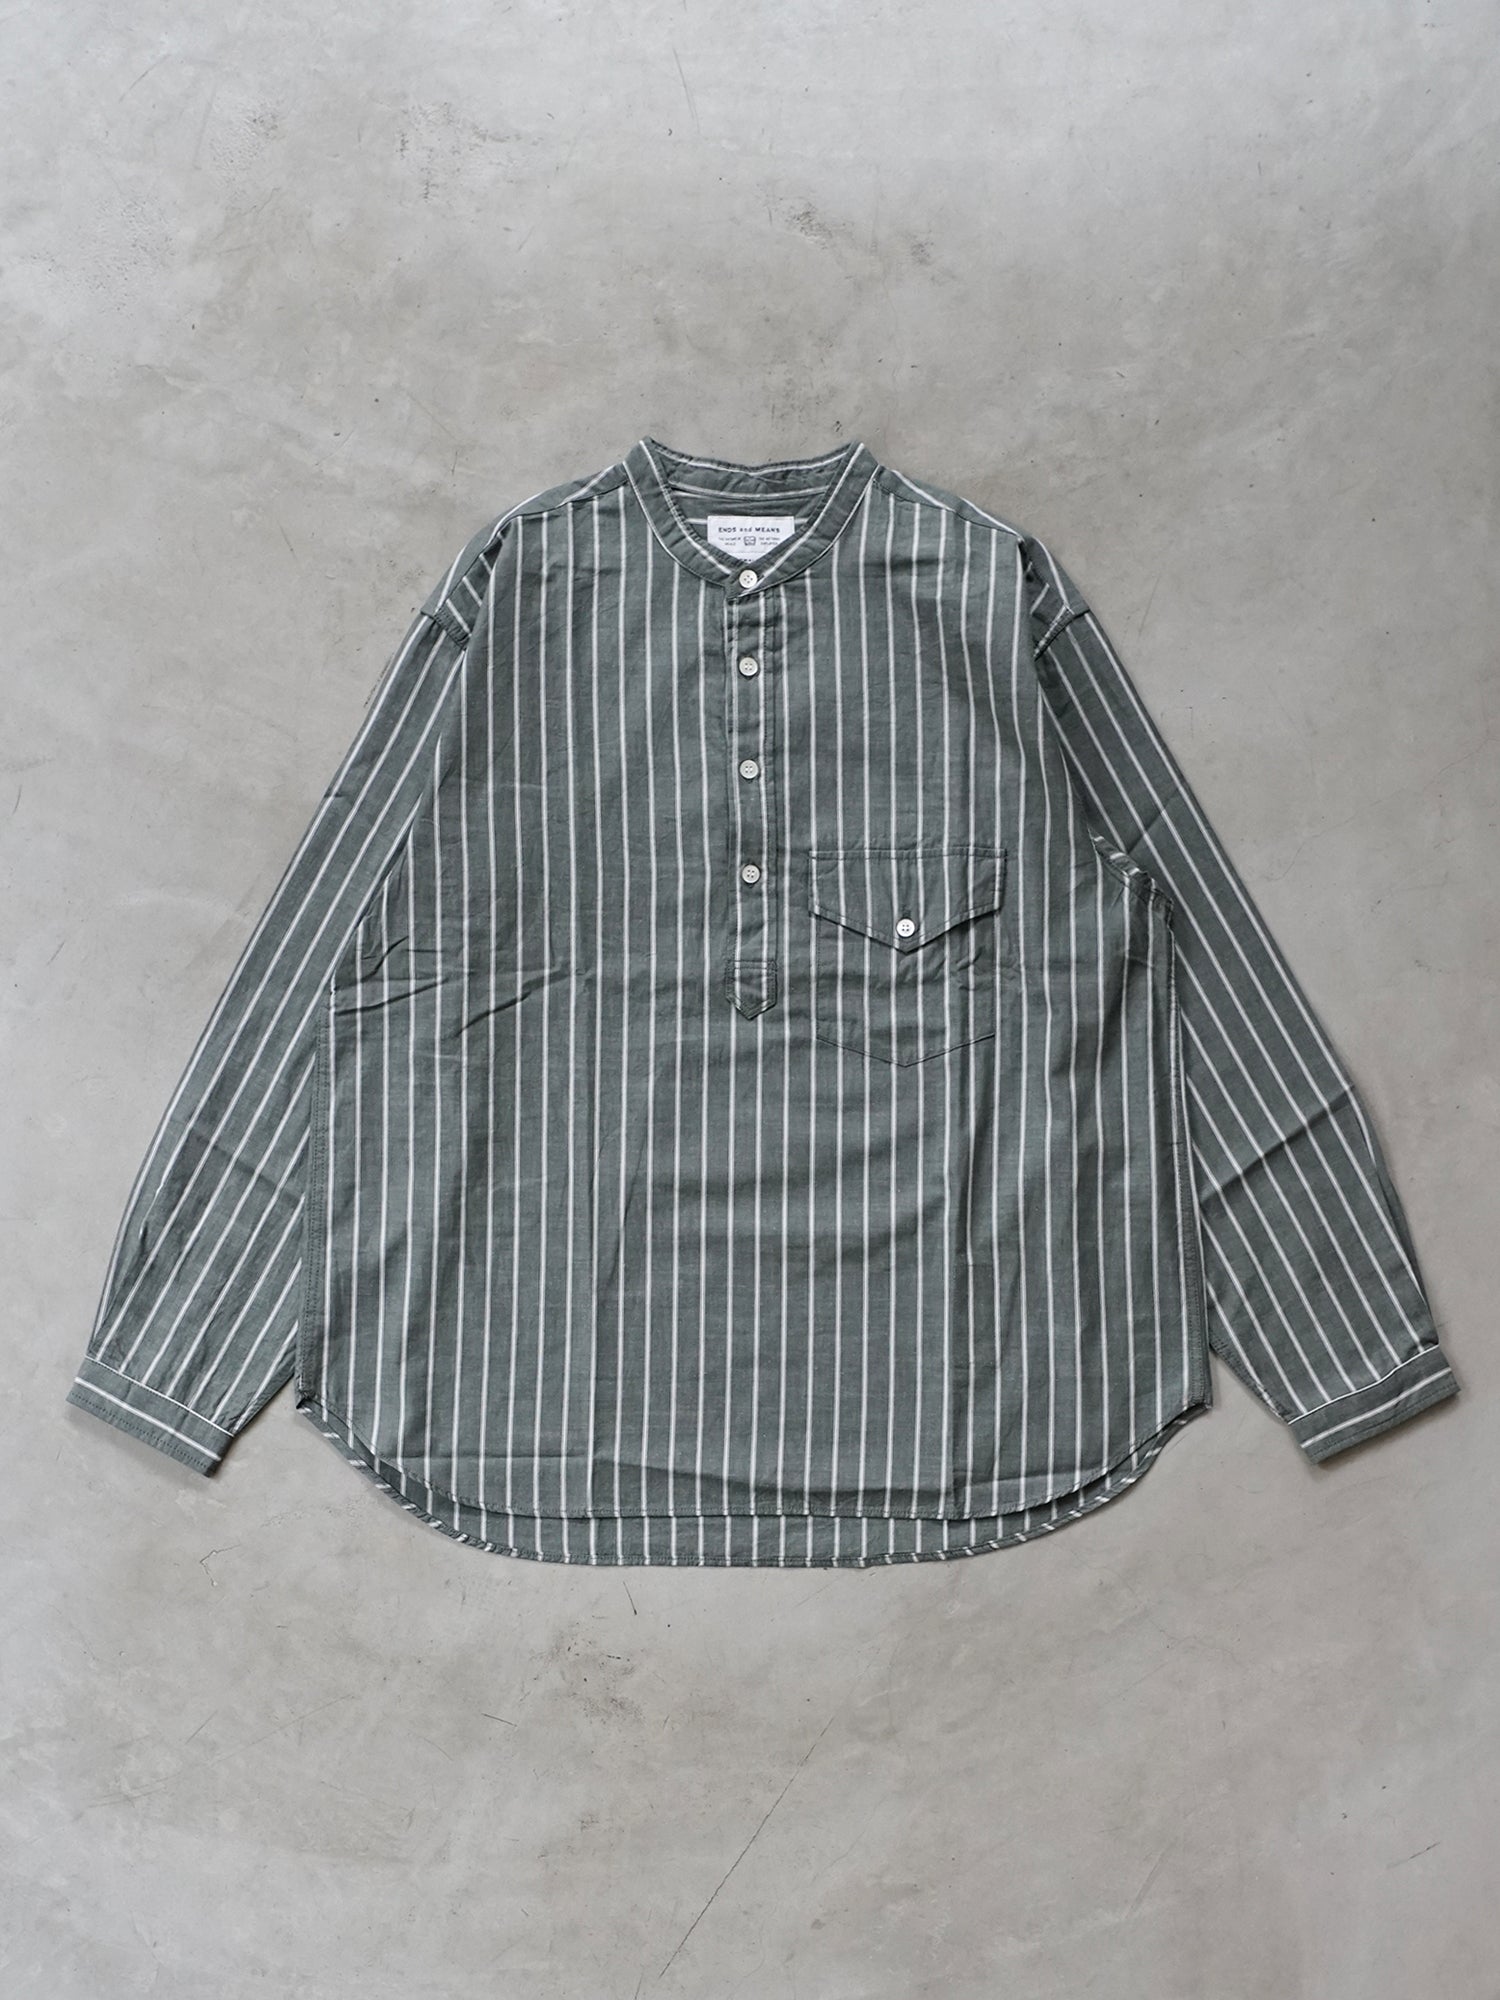 ENDS and MEANS P/O Band Collar Shirts